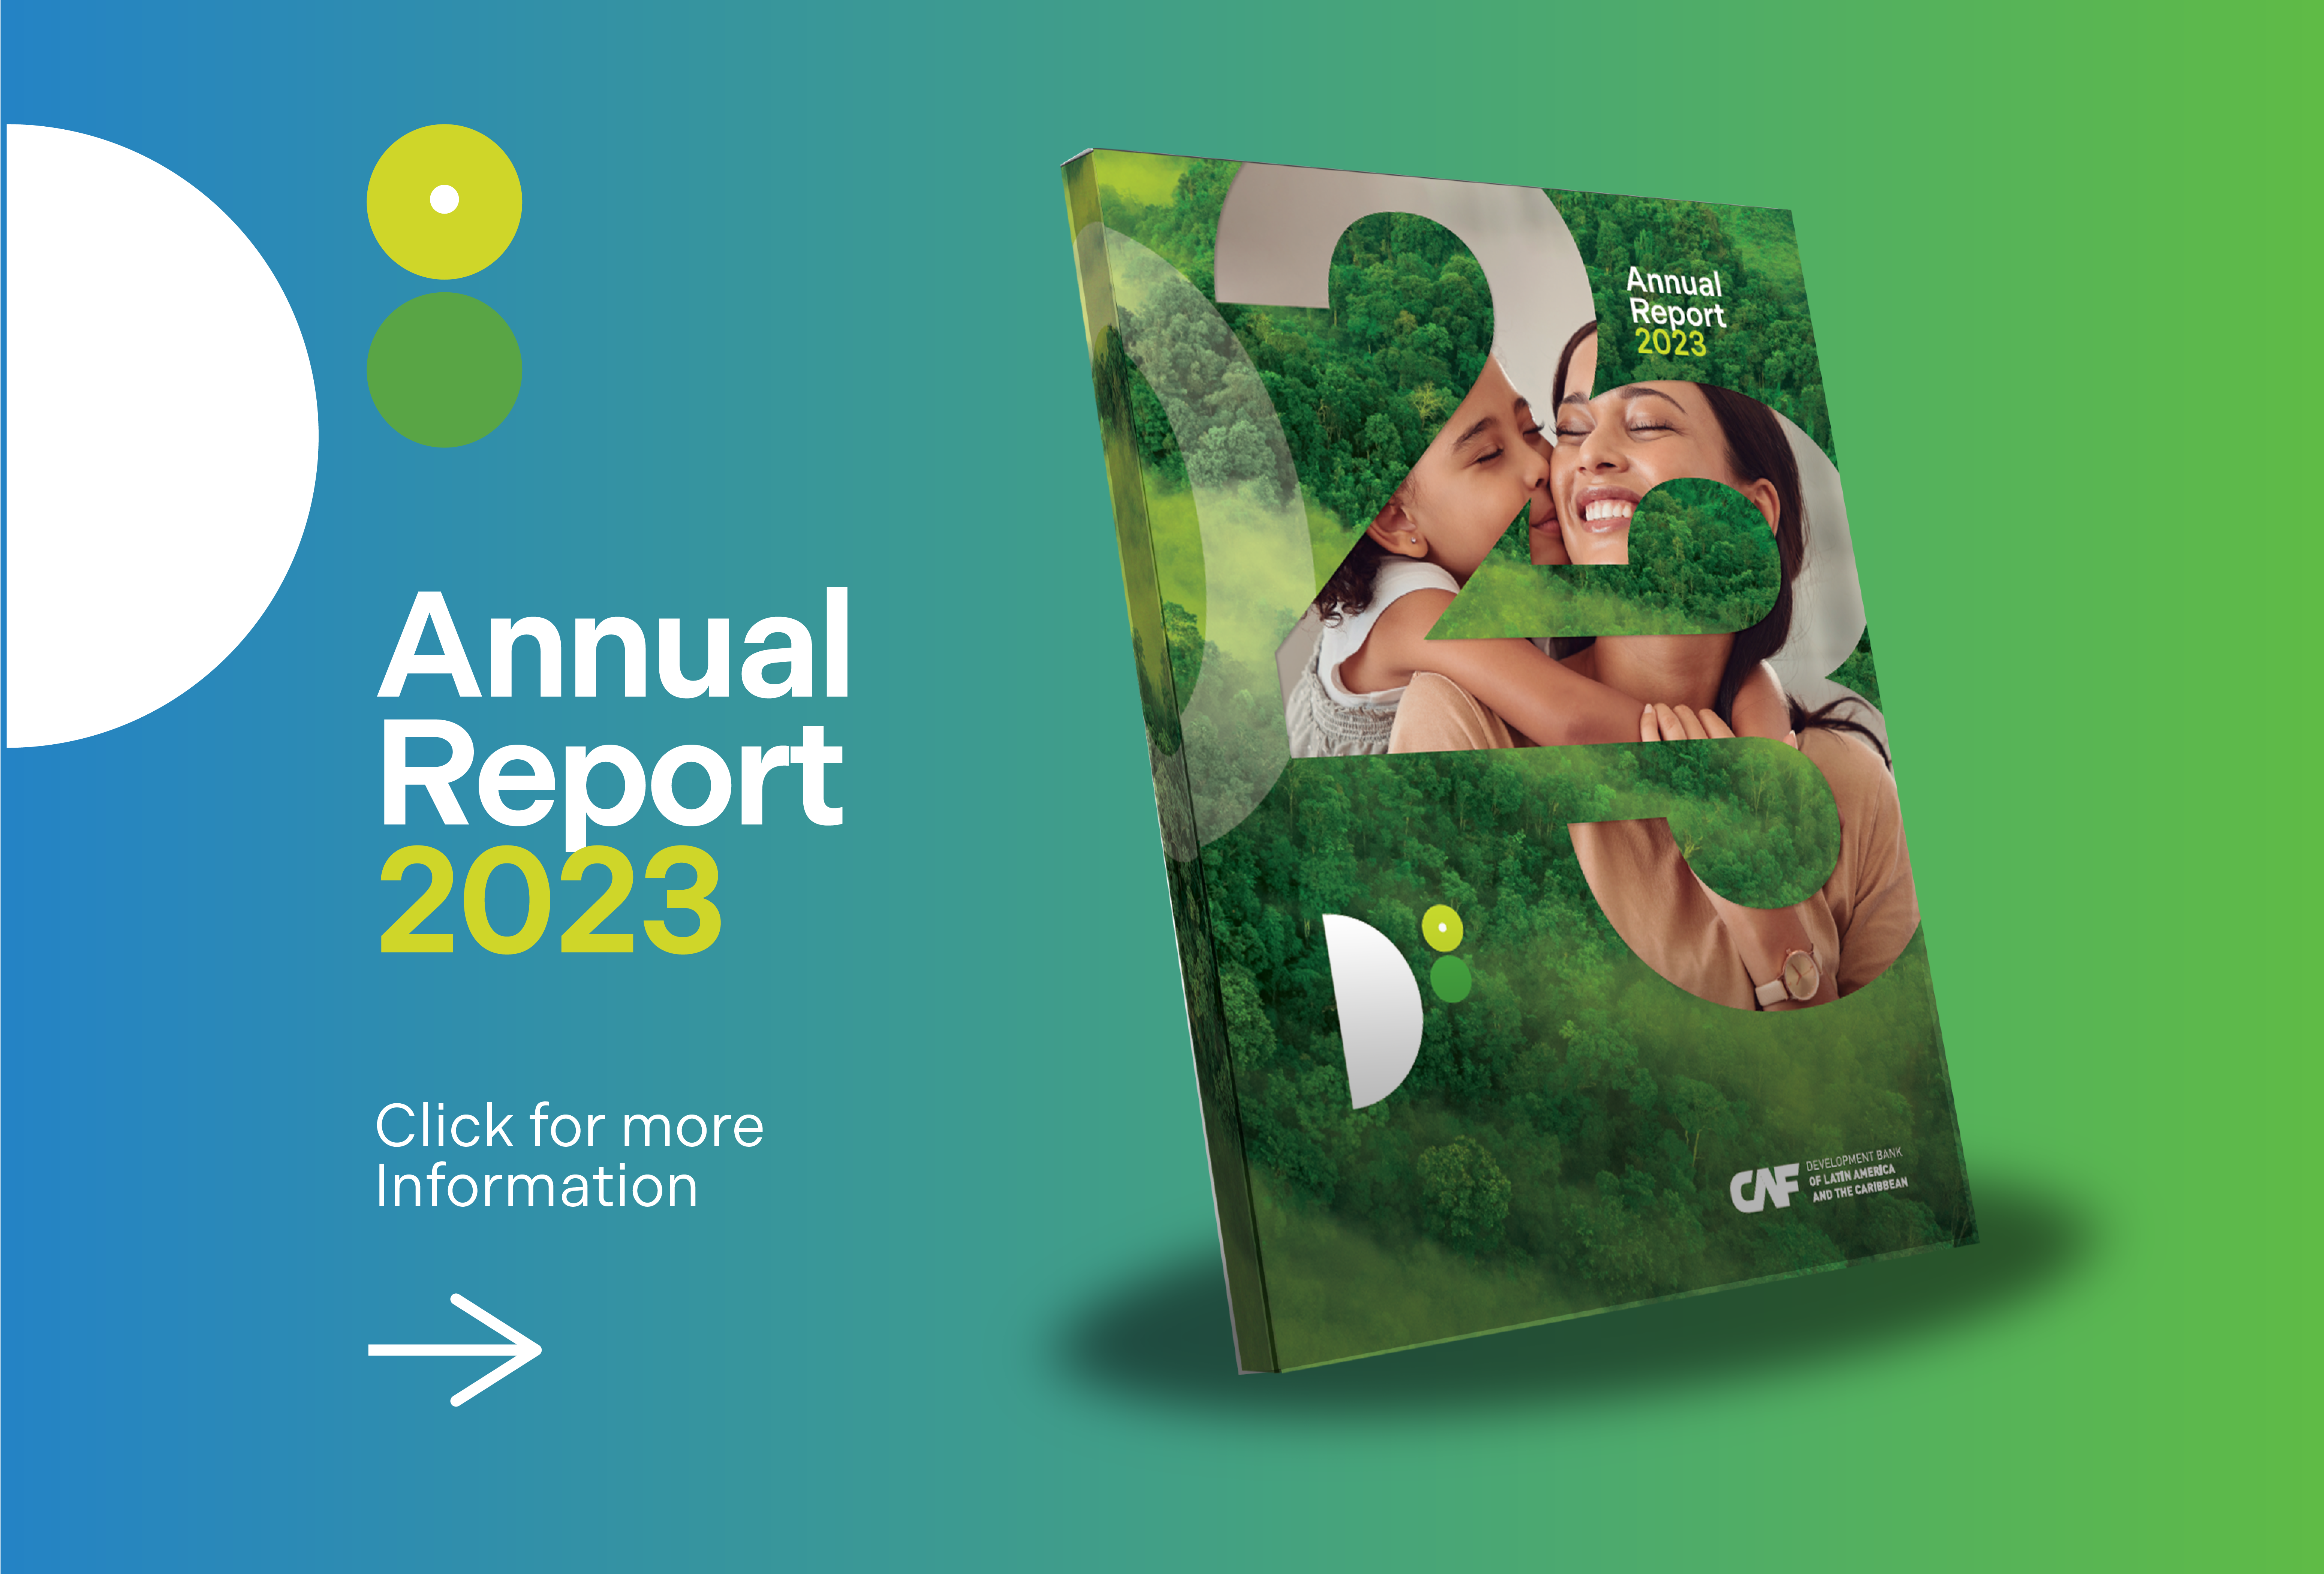 Annual Report: CAF is strengthened as the Green Bank of the region